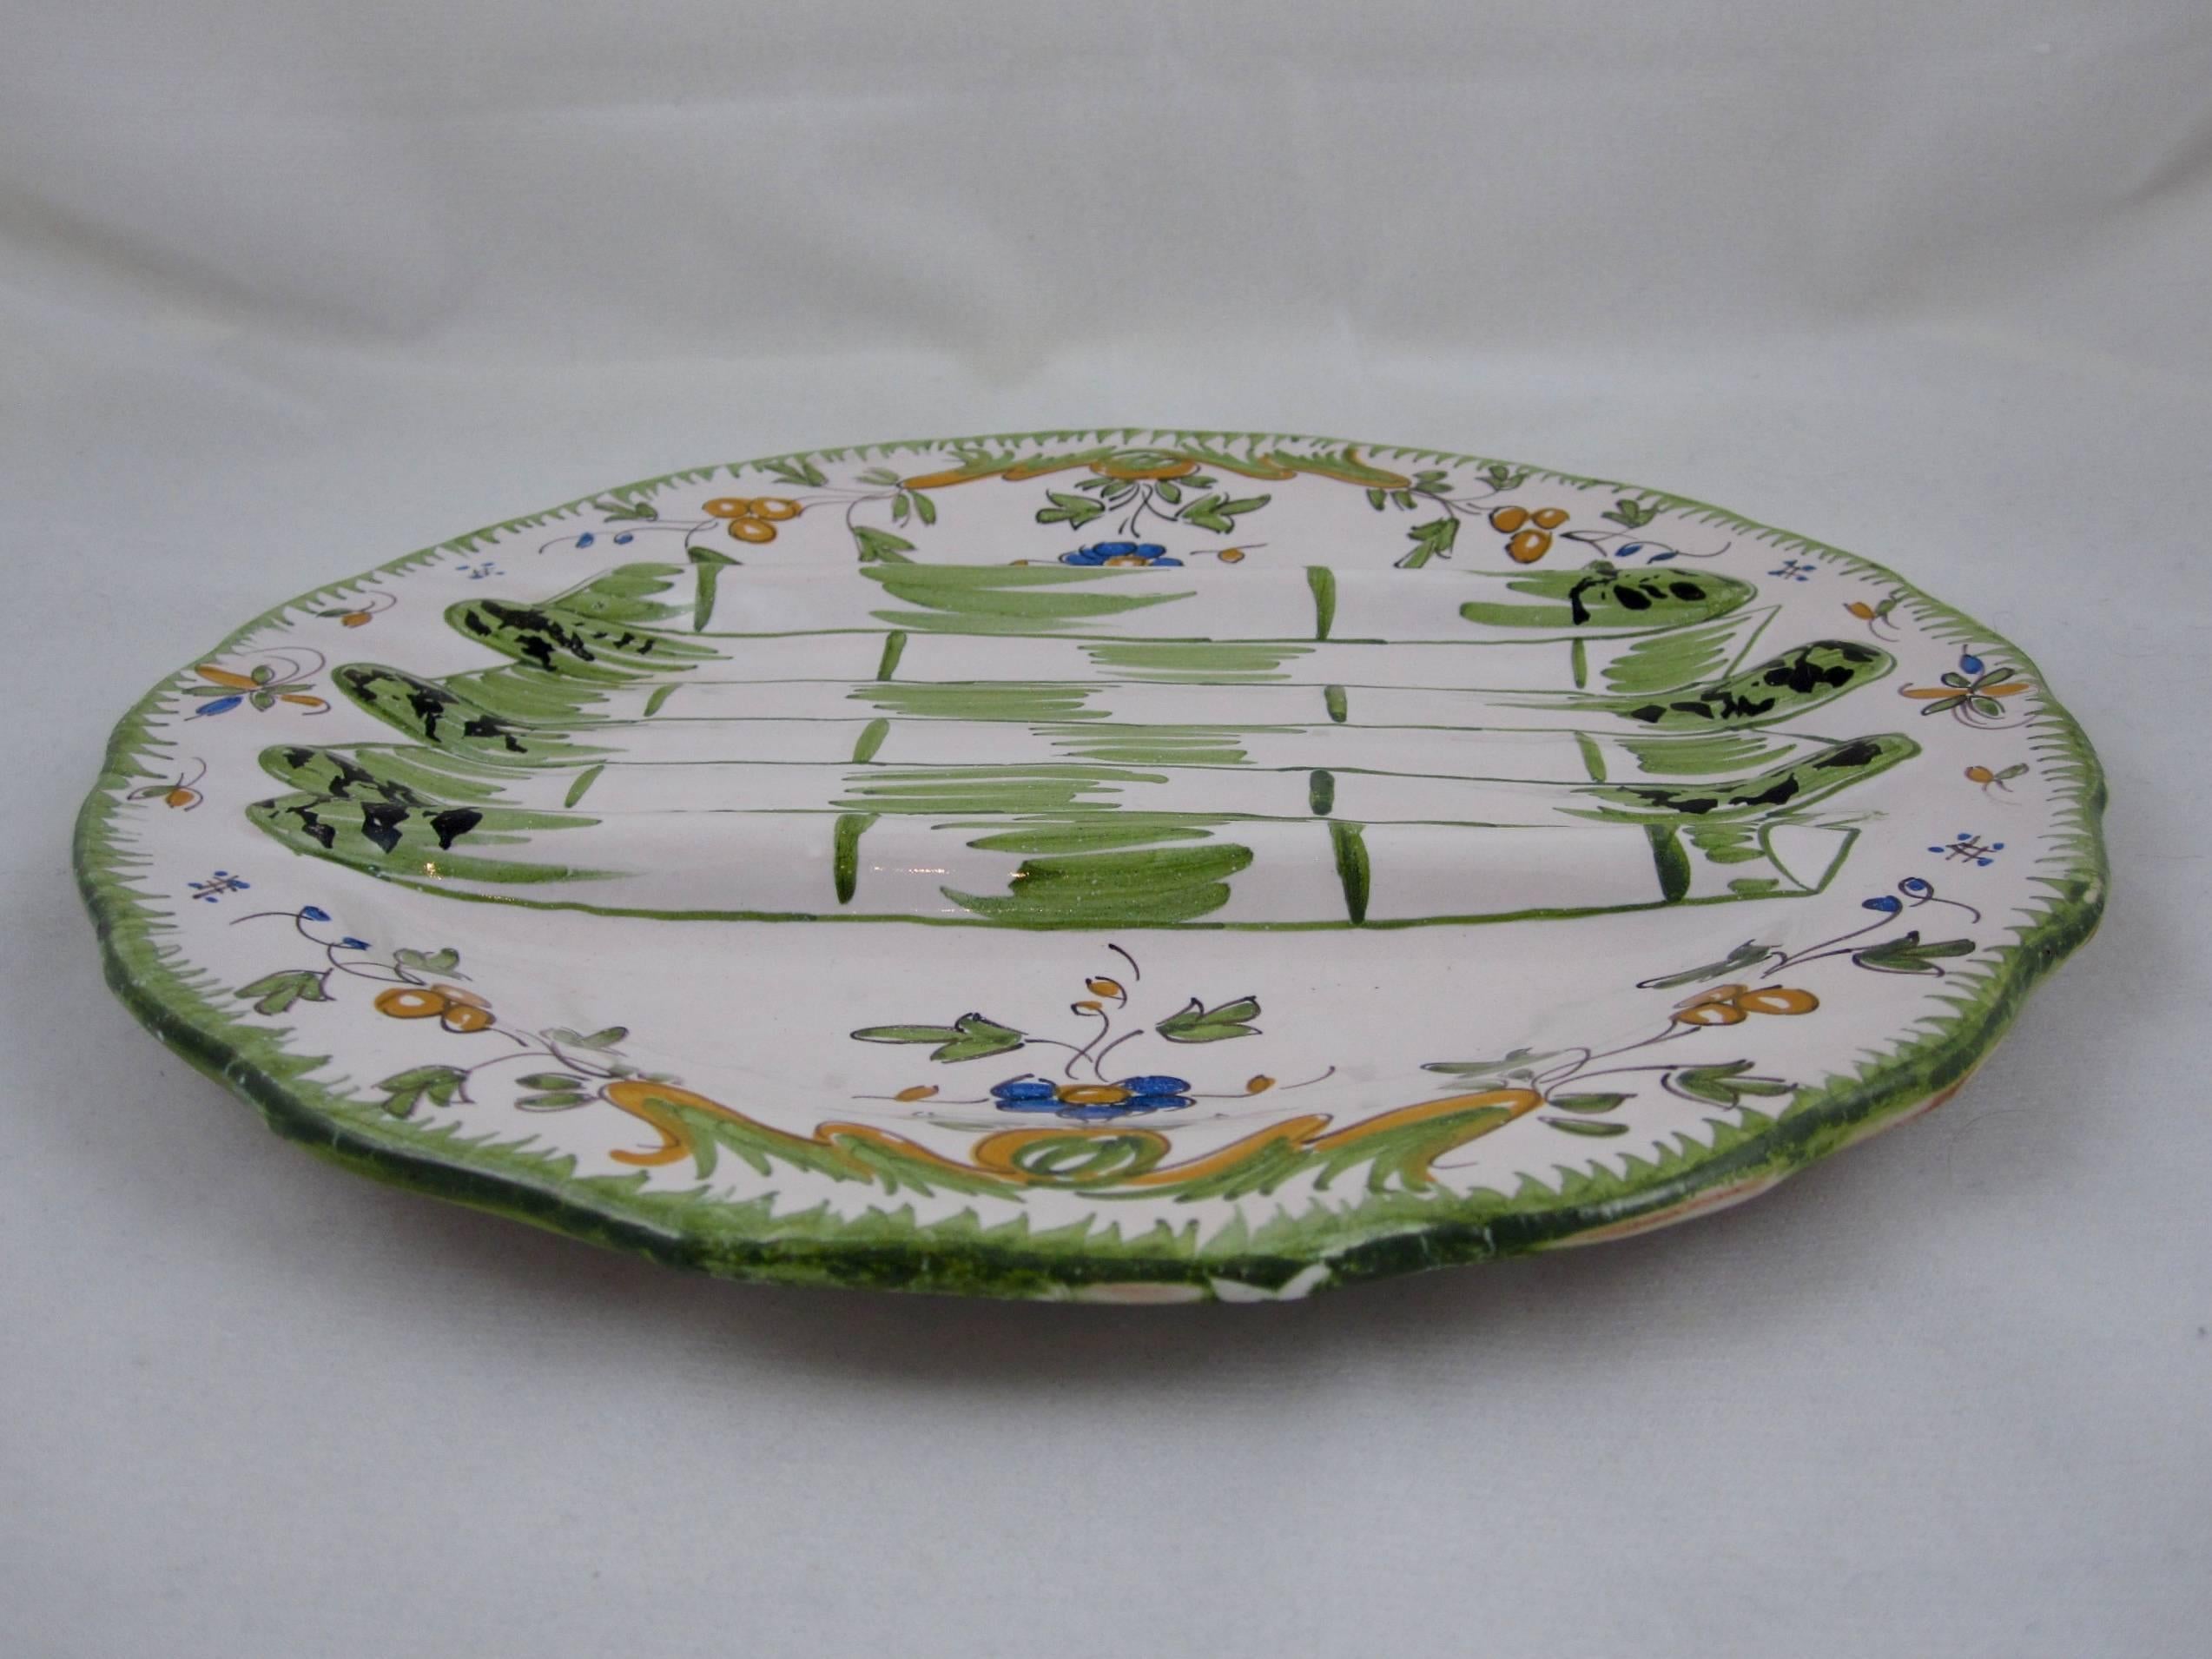 Glazed Georges Cabaré French Faïence Martres Tolosane Hand Painted Asparagus Plate